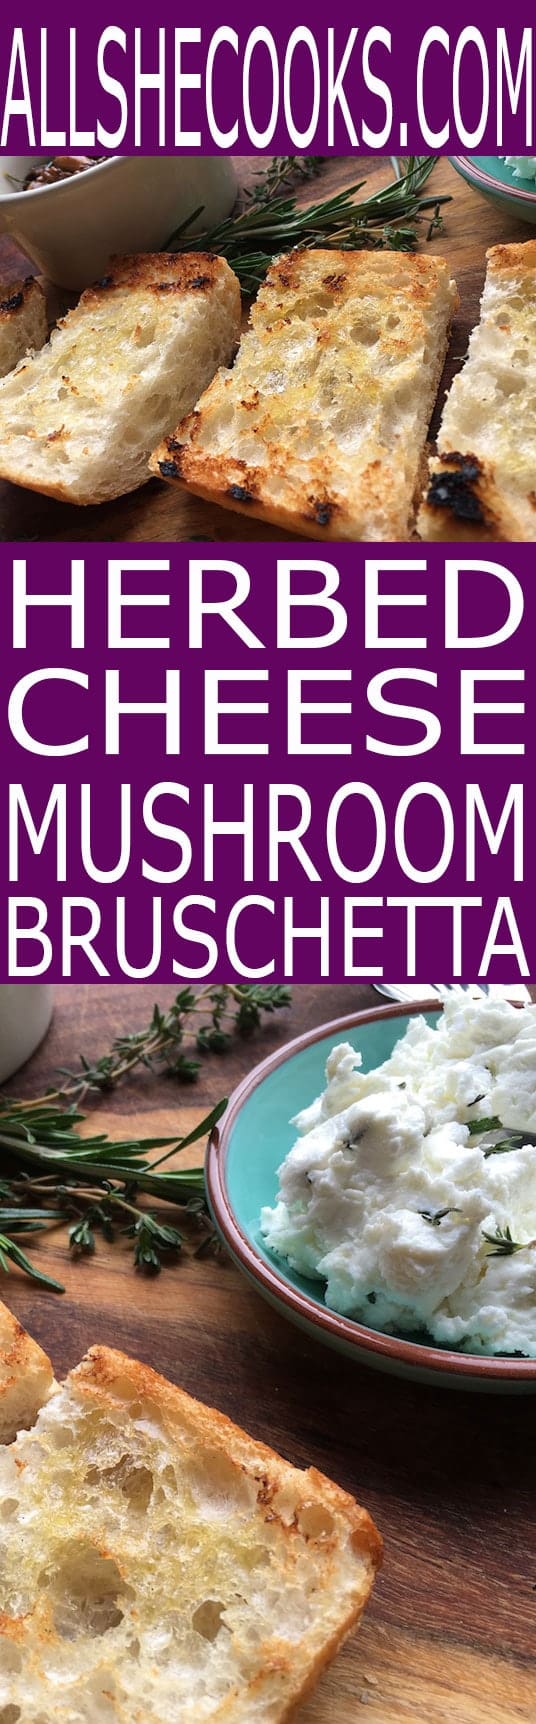 Enjoy this tasty berbed cheese and mushroom bruschetta recipe that makes an easy appetizer recipe to serve up at your next gathering.